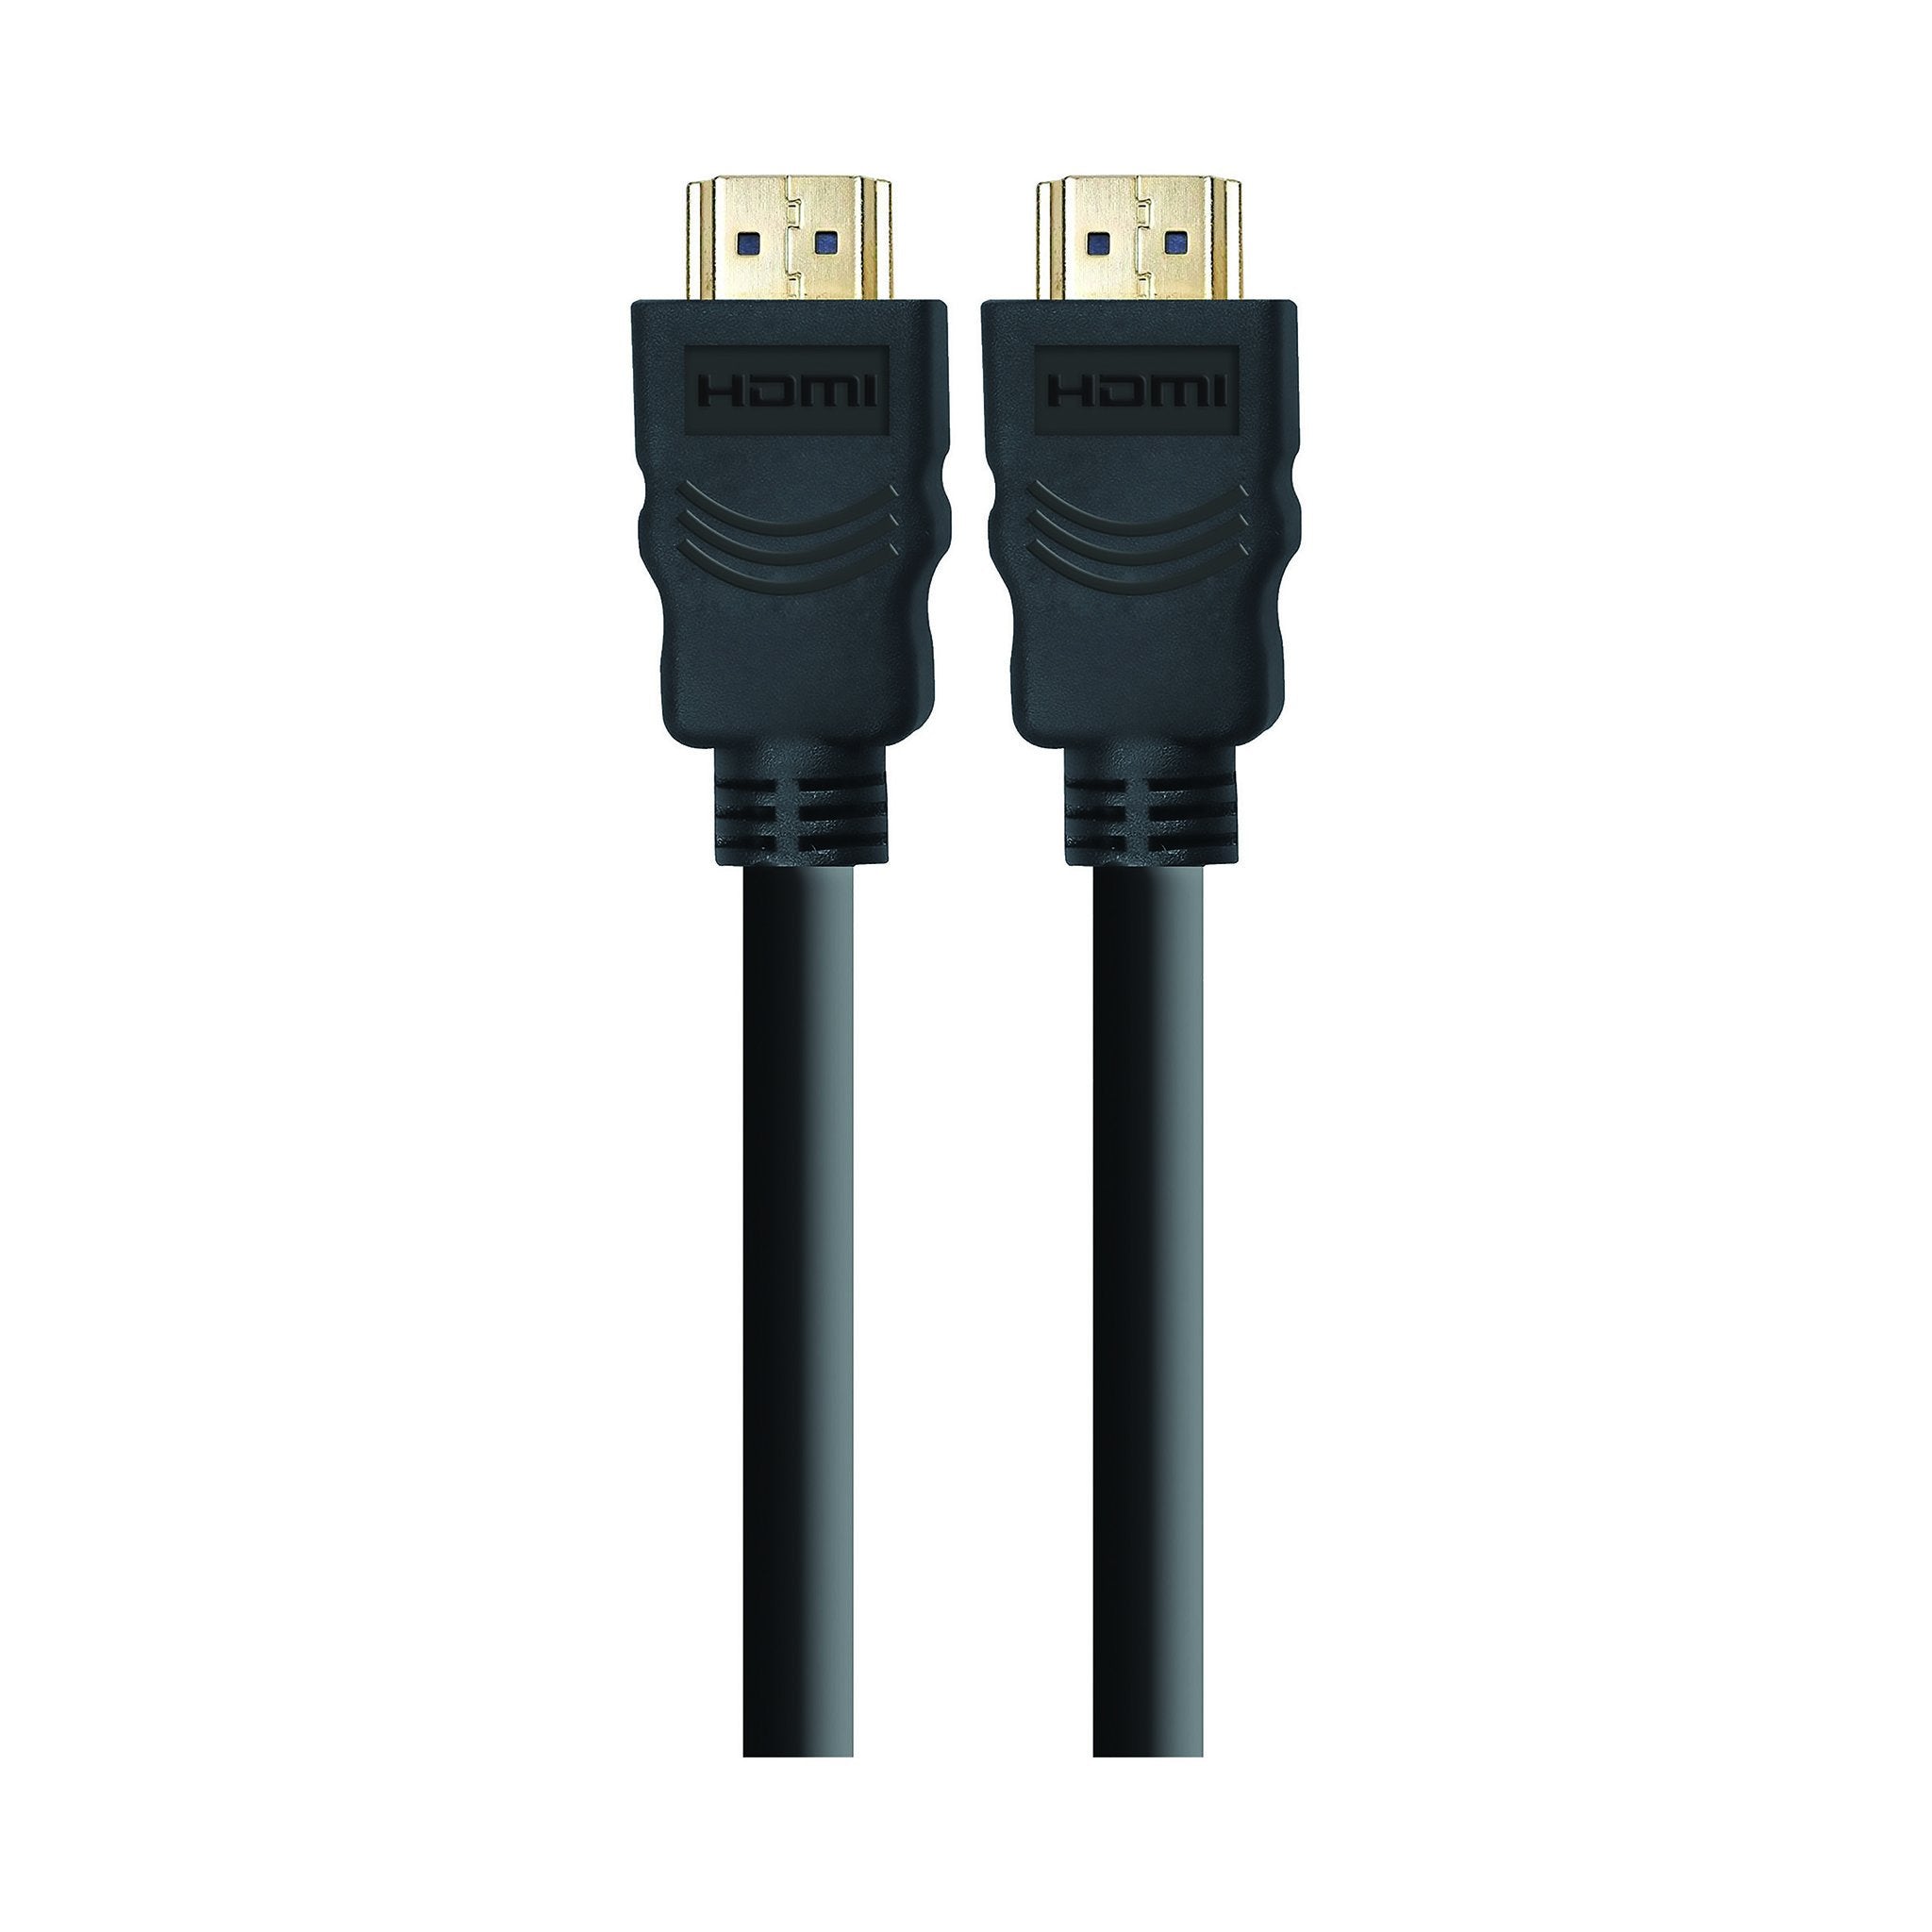 12FT HIGH SPEED HDMI CABLE WITH ETHERNET